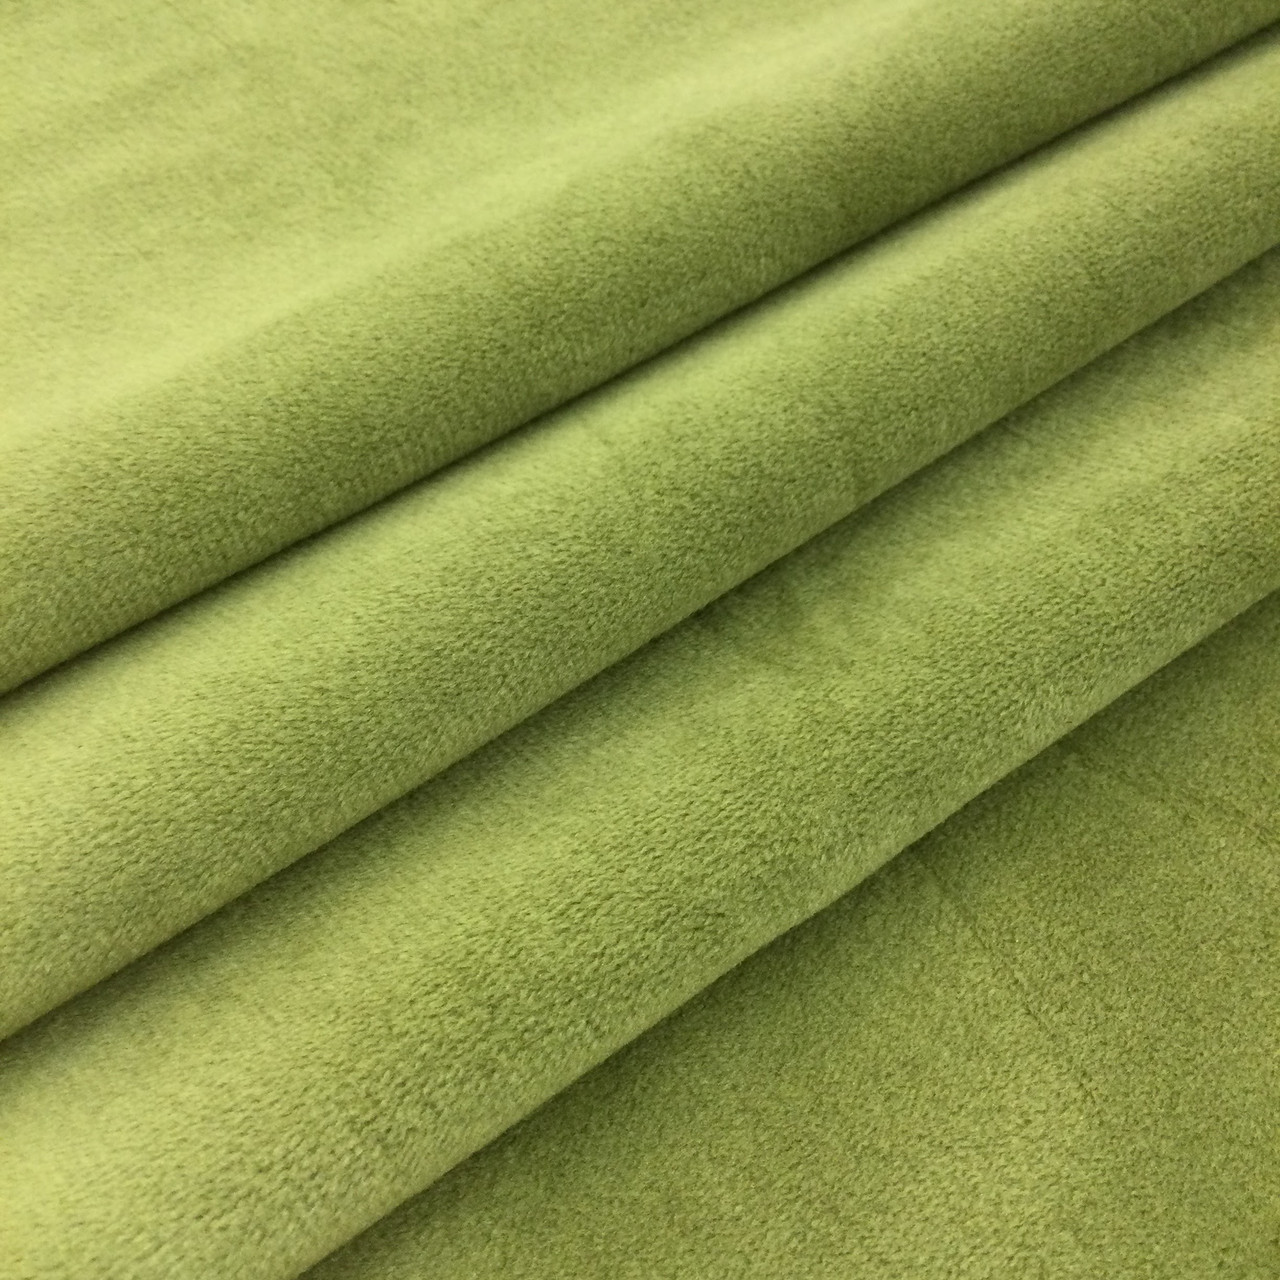 Chive Green Microfiber Velvet Fabric by Richloom, Microfiber Velvet Fabric, Upholstery / Heavy Drapery, 54 Wide